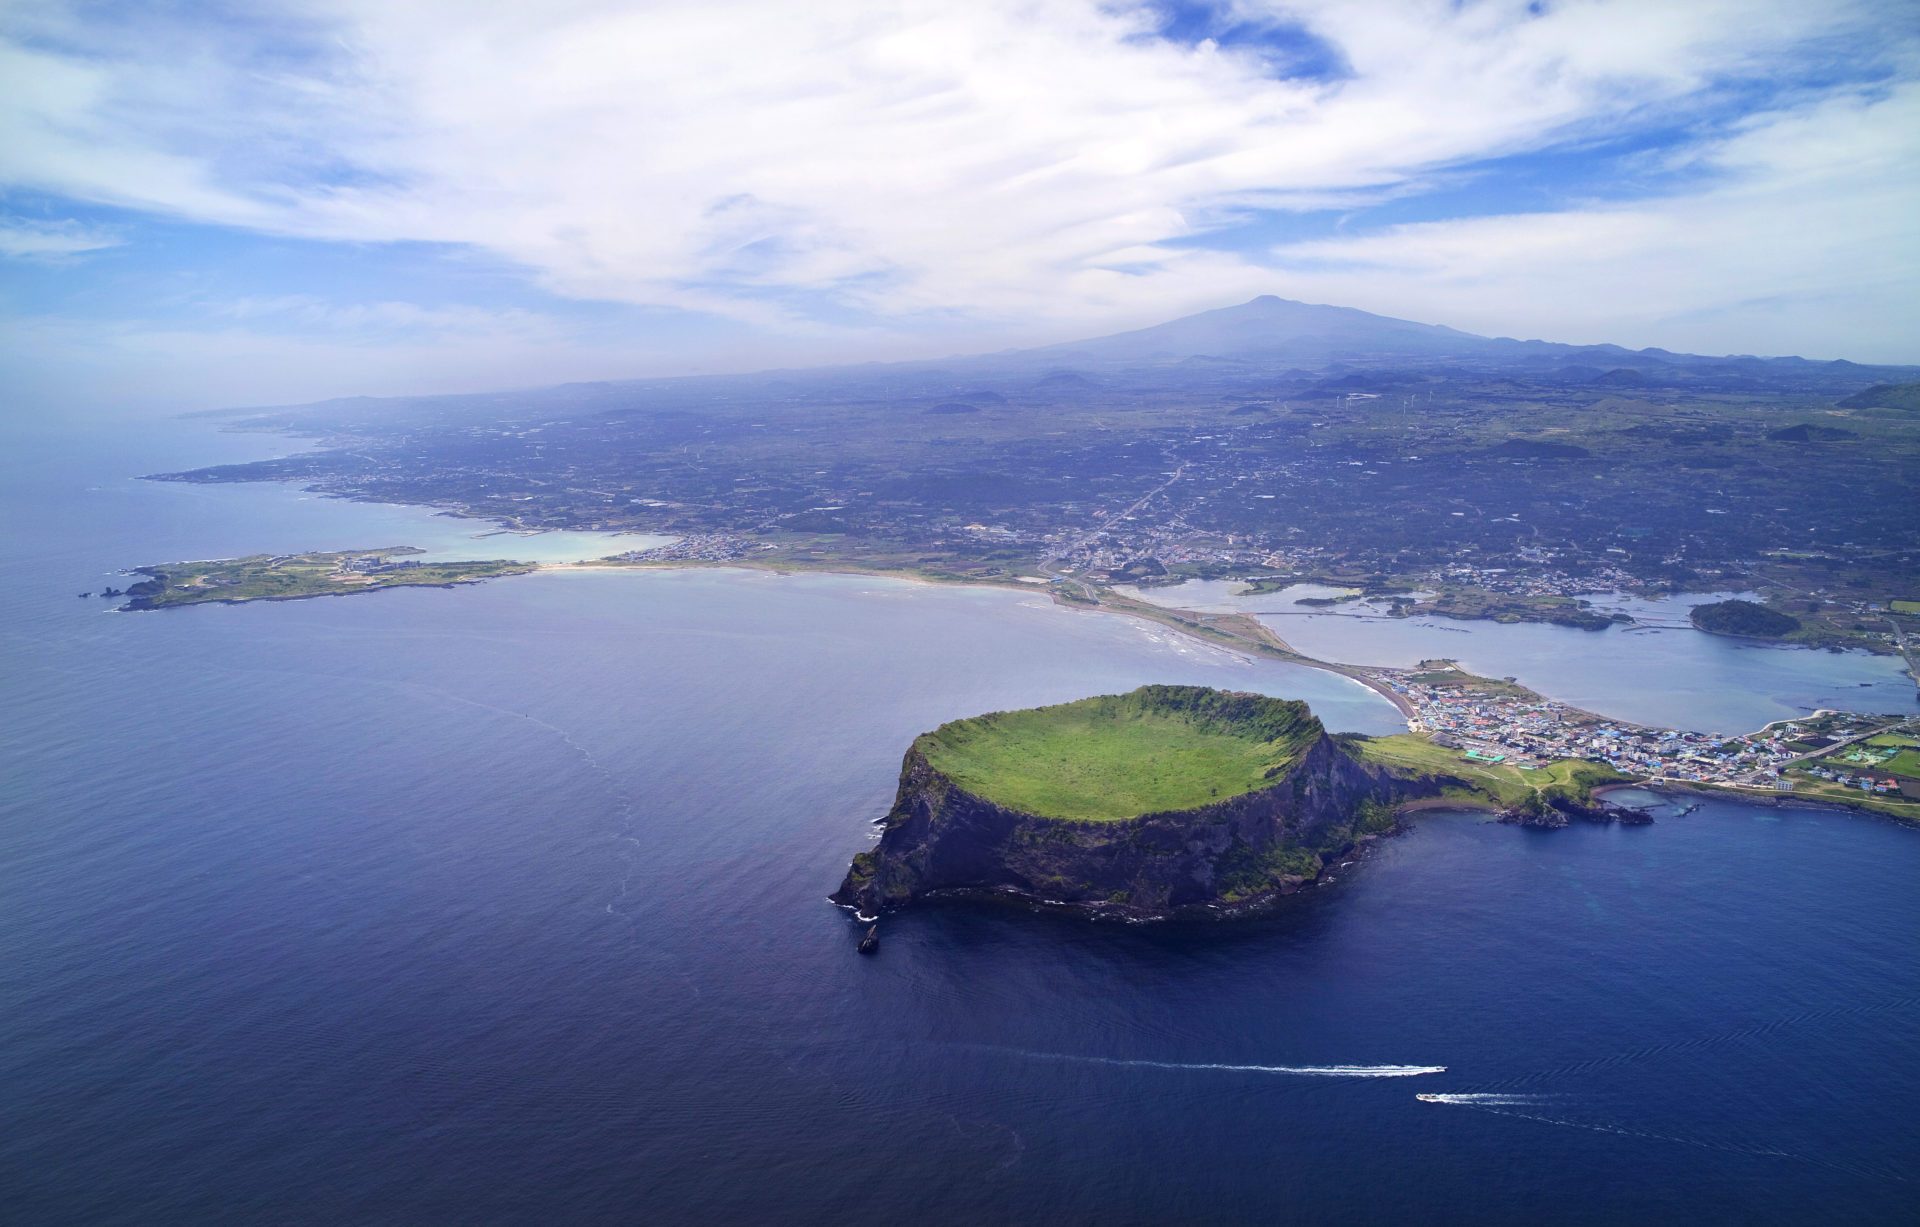 A central feature of Jeju is Hallasan, the tallest mountain in South Korea and a dormant volcano, which rises 1,950 m above sea level.